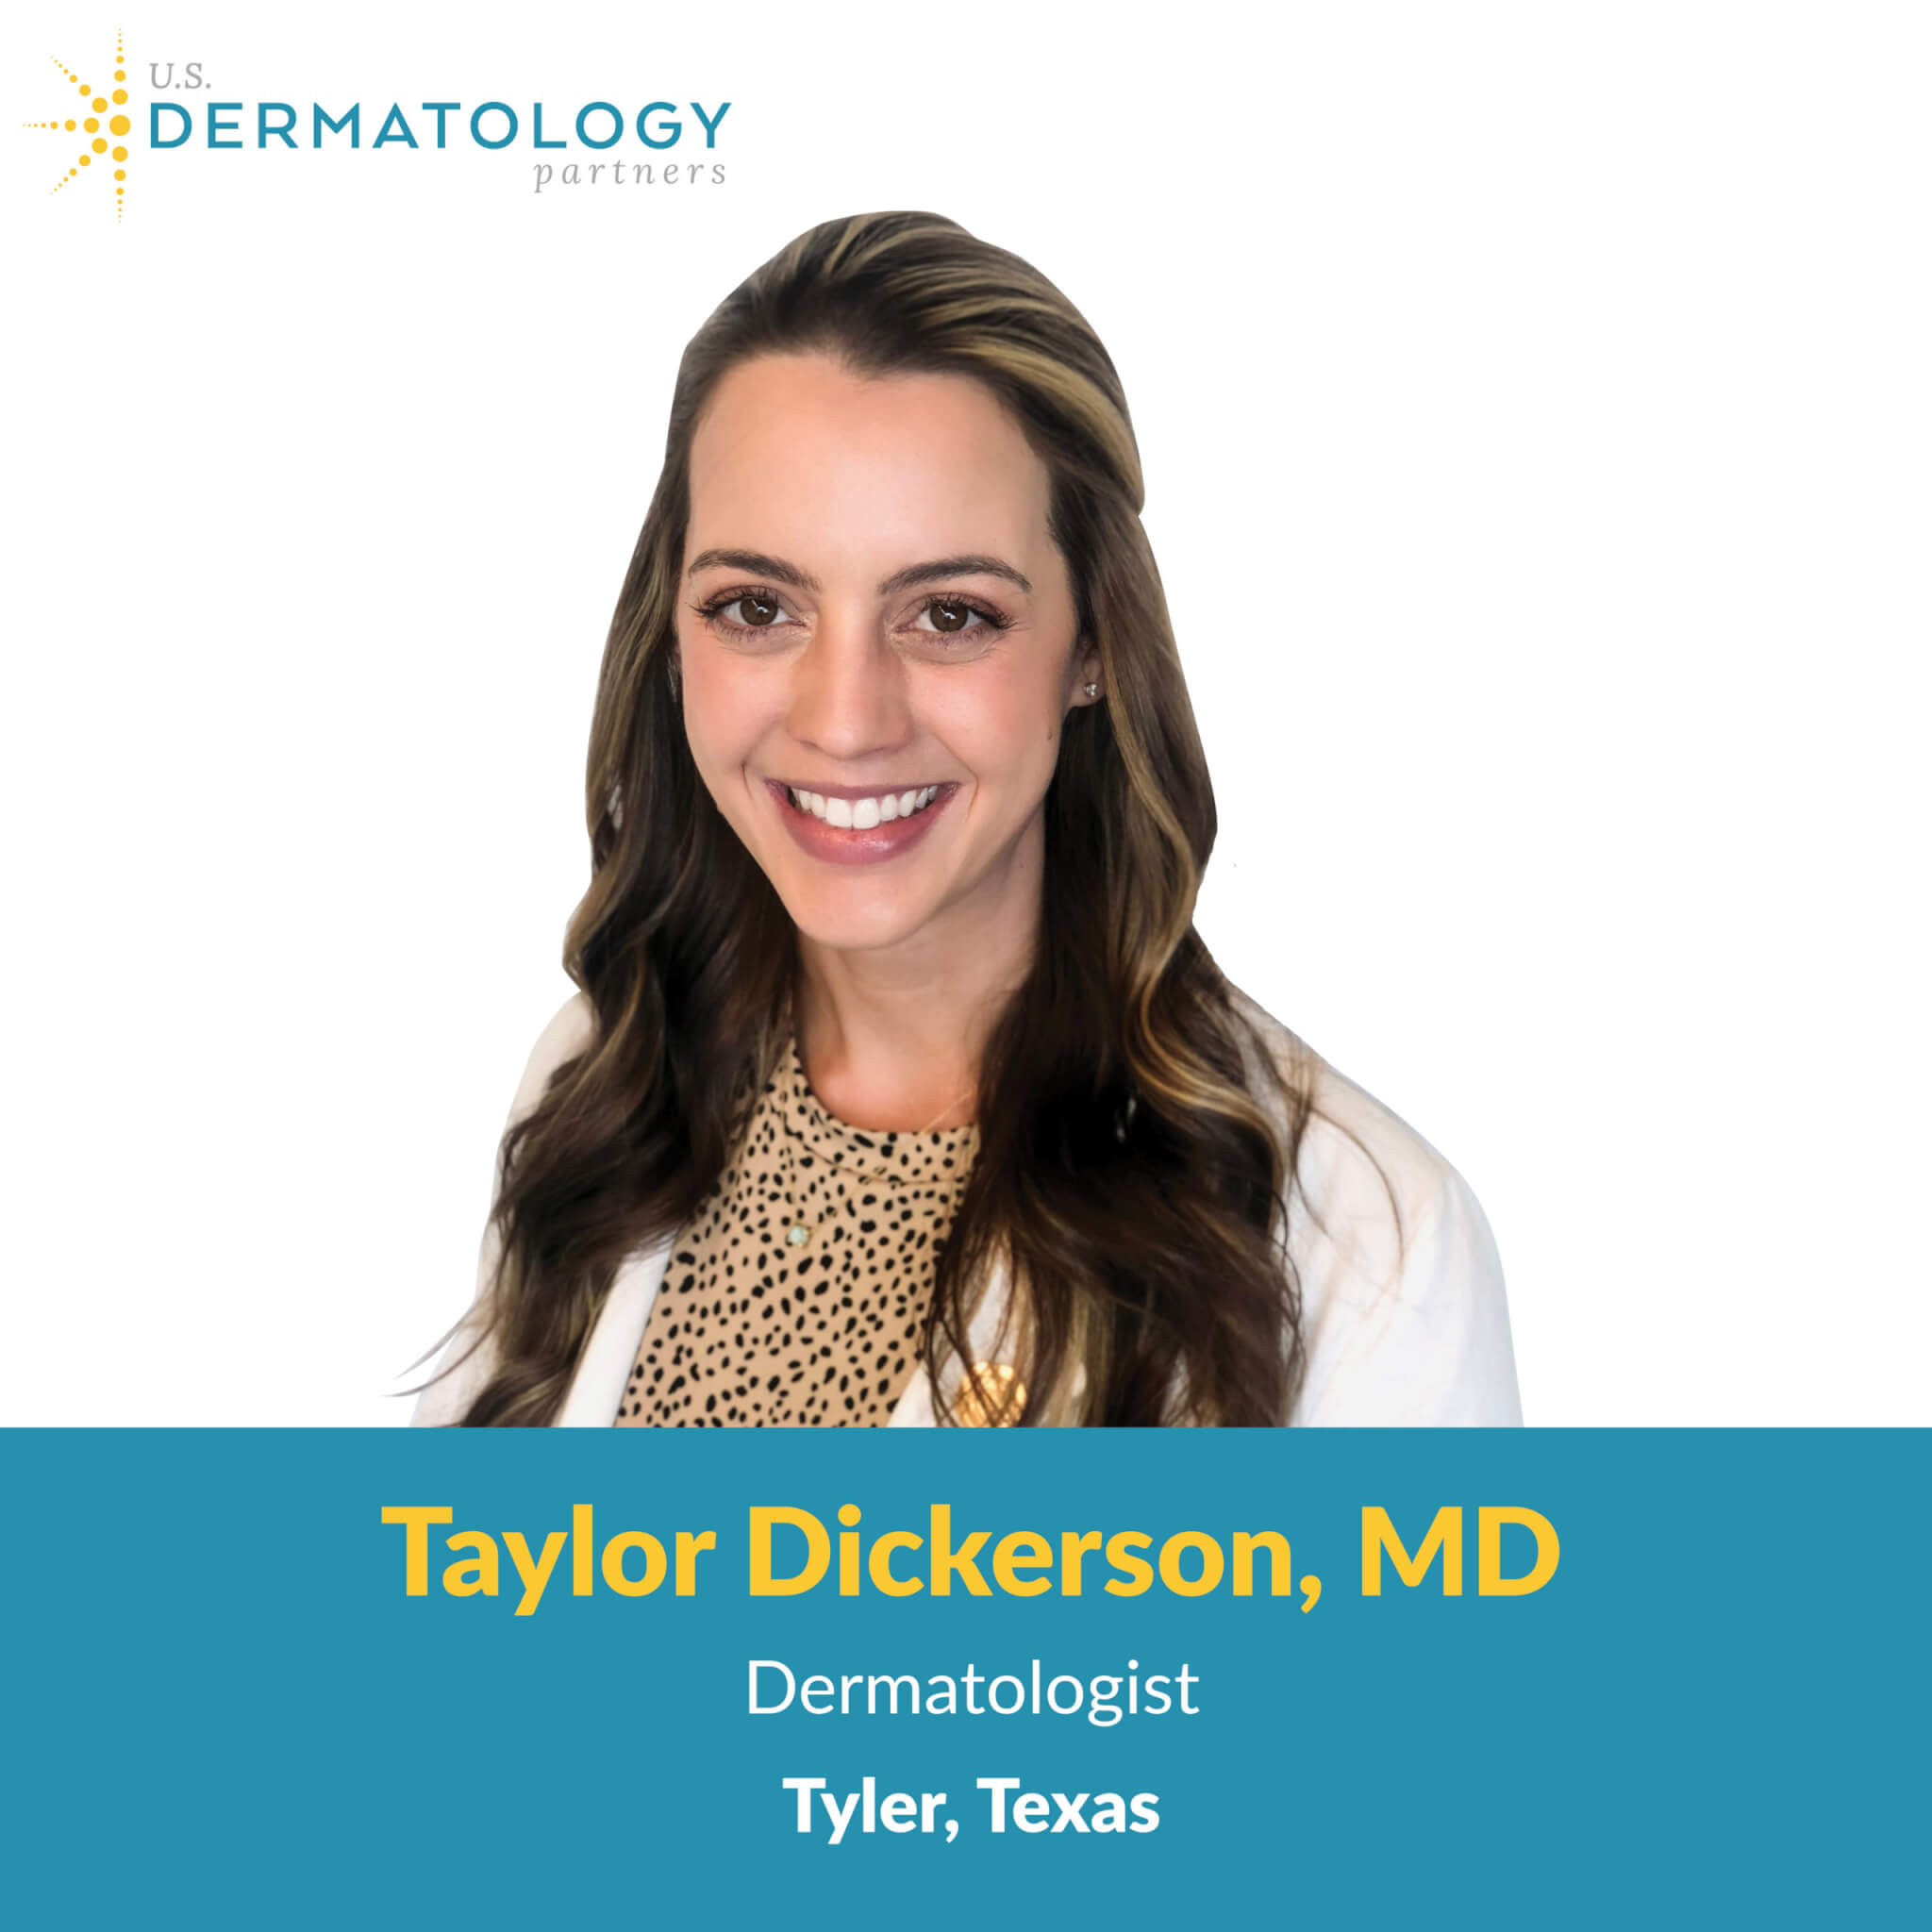 Welcome Taylor Dickerson, MD to Tyler, Texas | U.S. Dermatology Partners